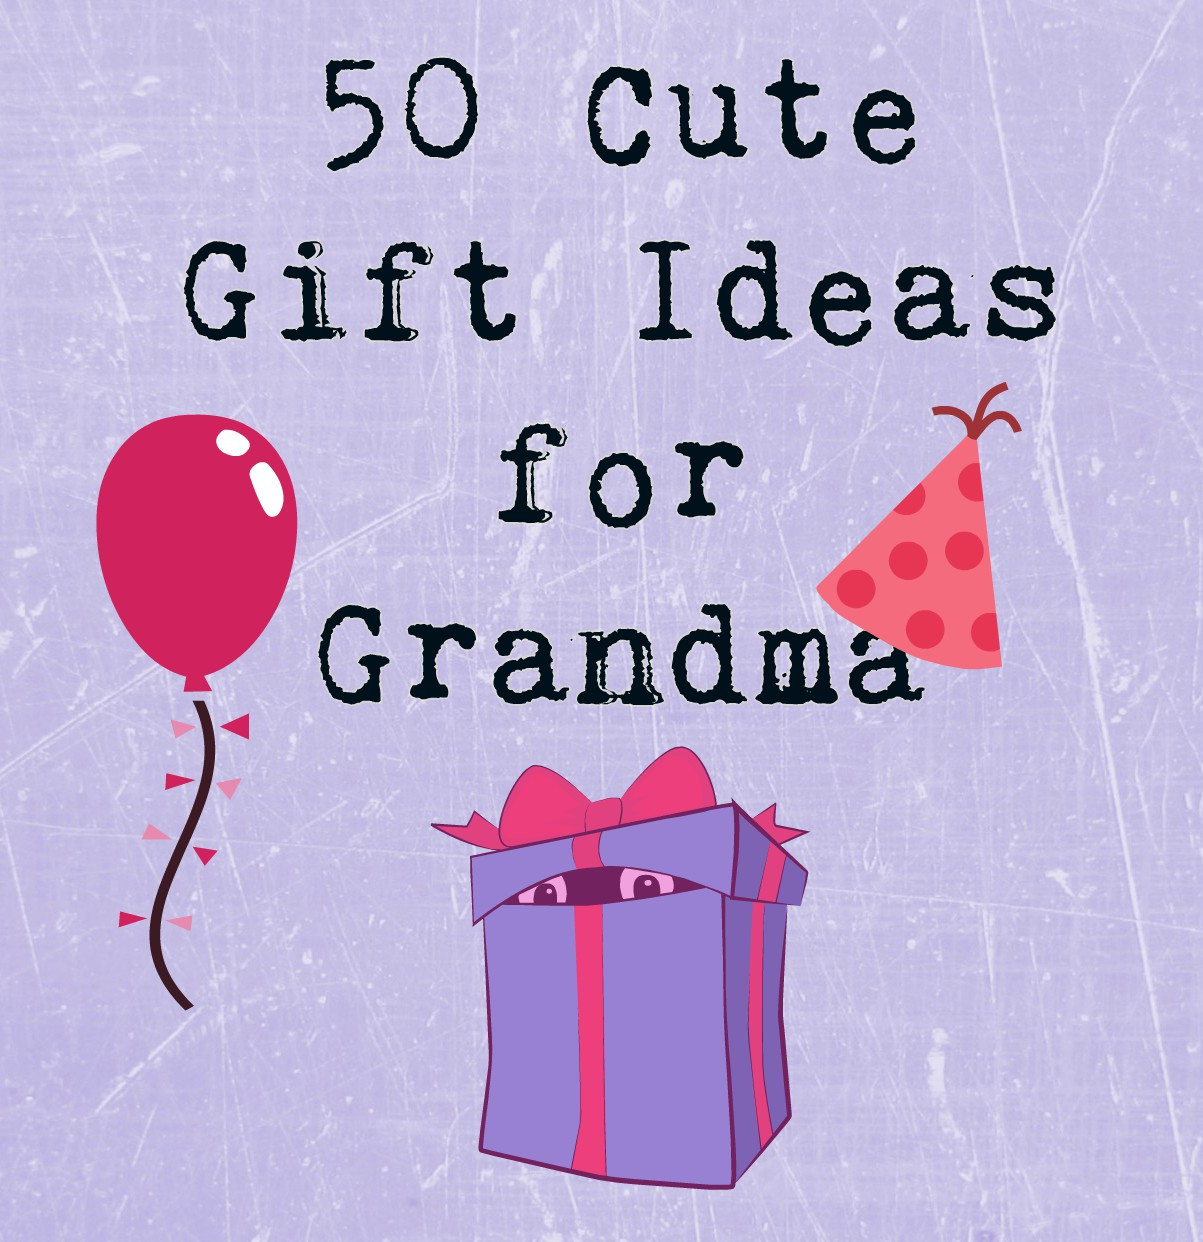 Gift Ideas Grandmother
 50 Really Sweet Gifts for Grandmas